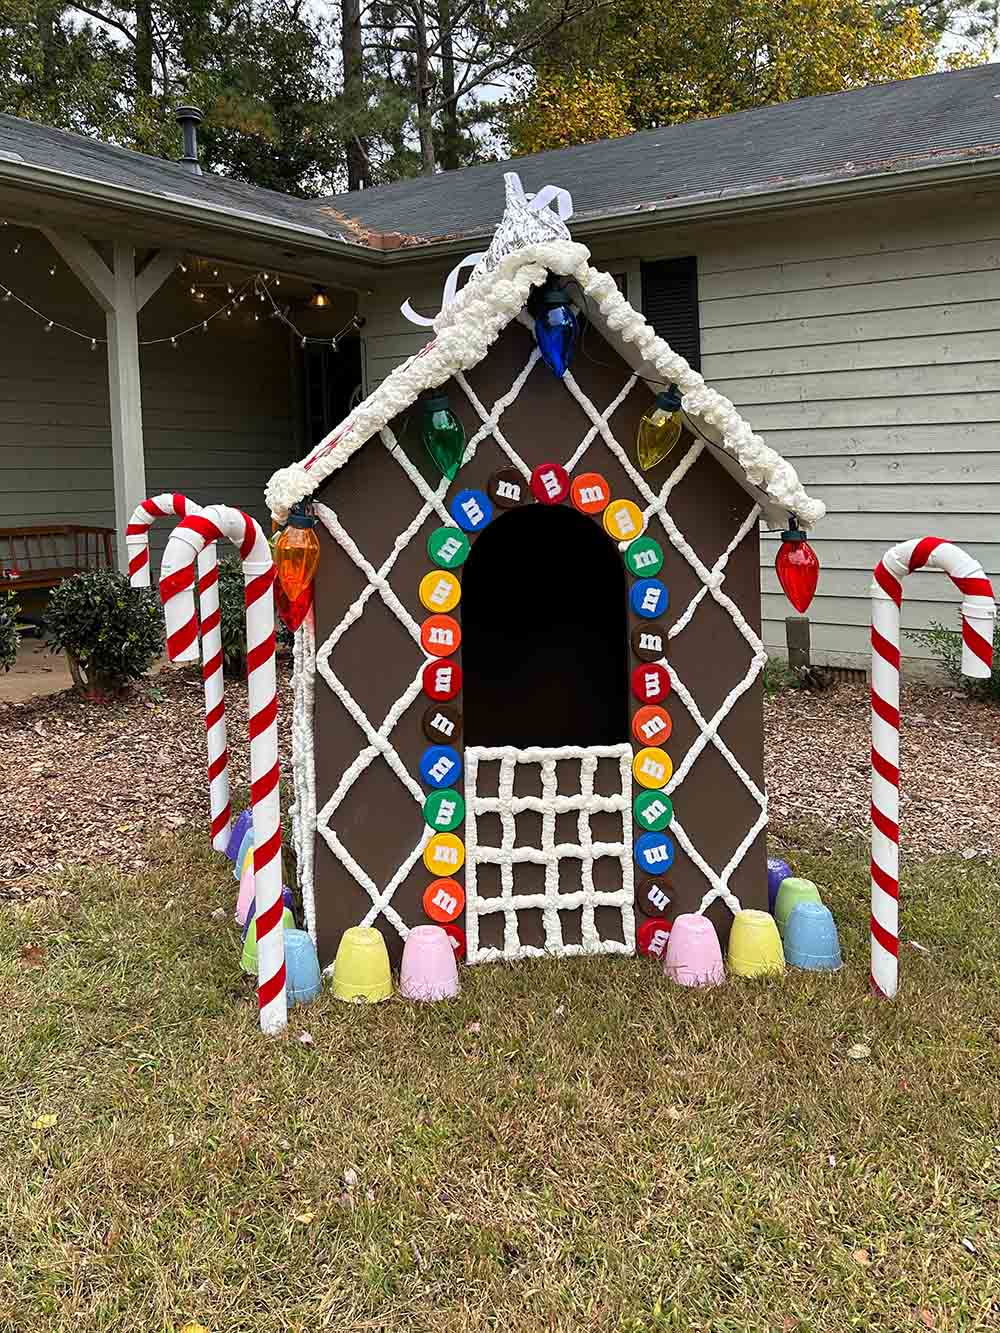 A completed shot of the assembled Gingerbread house.